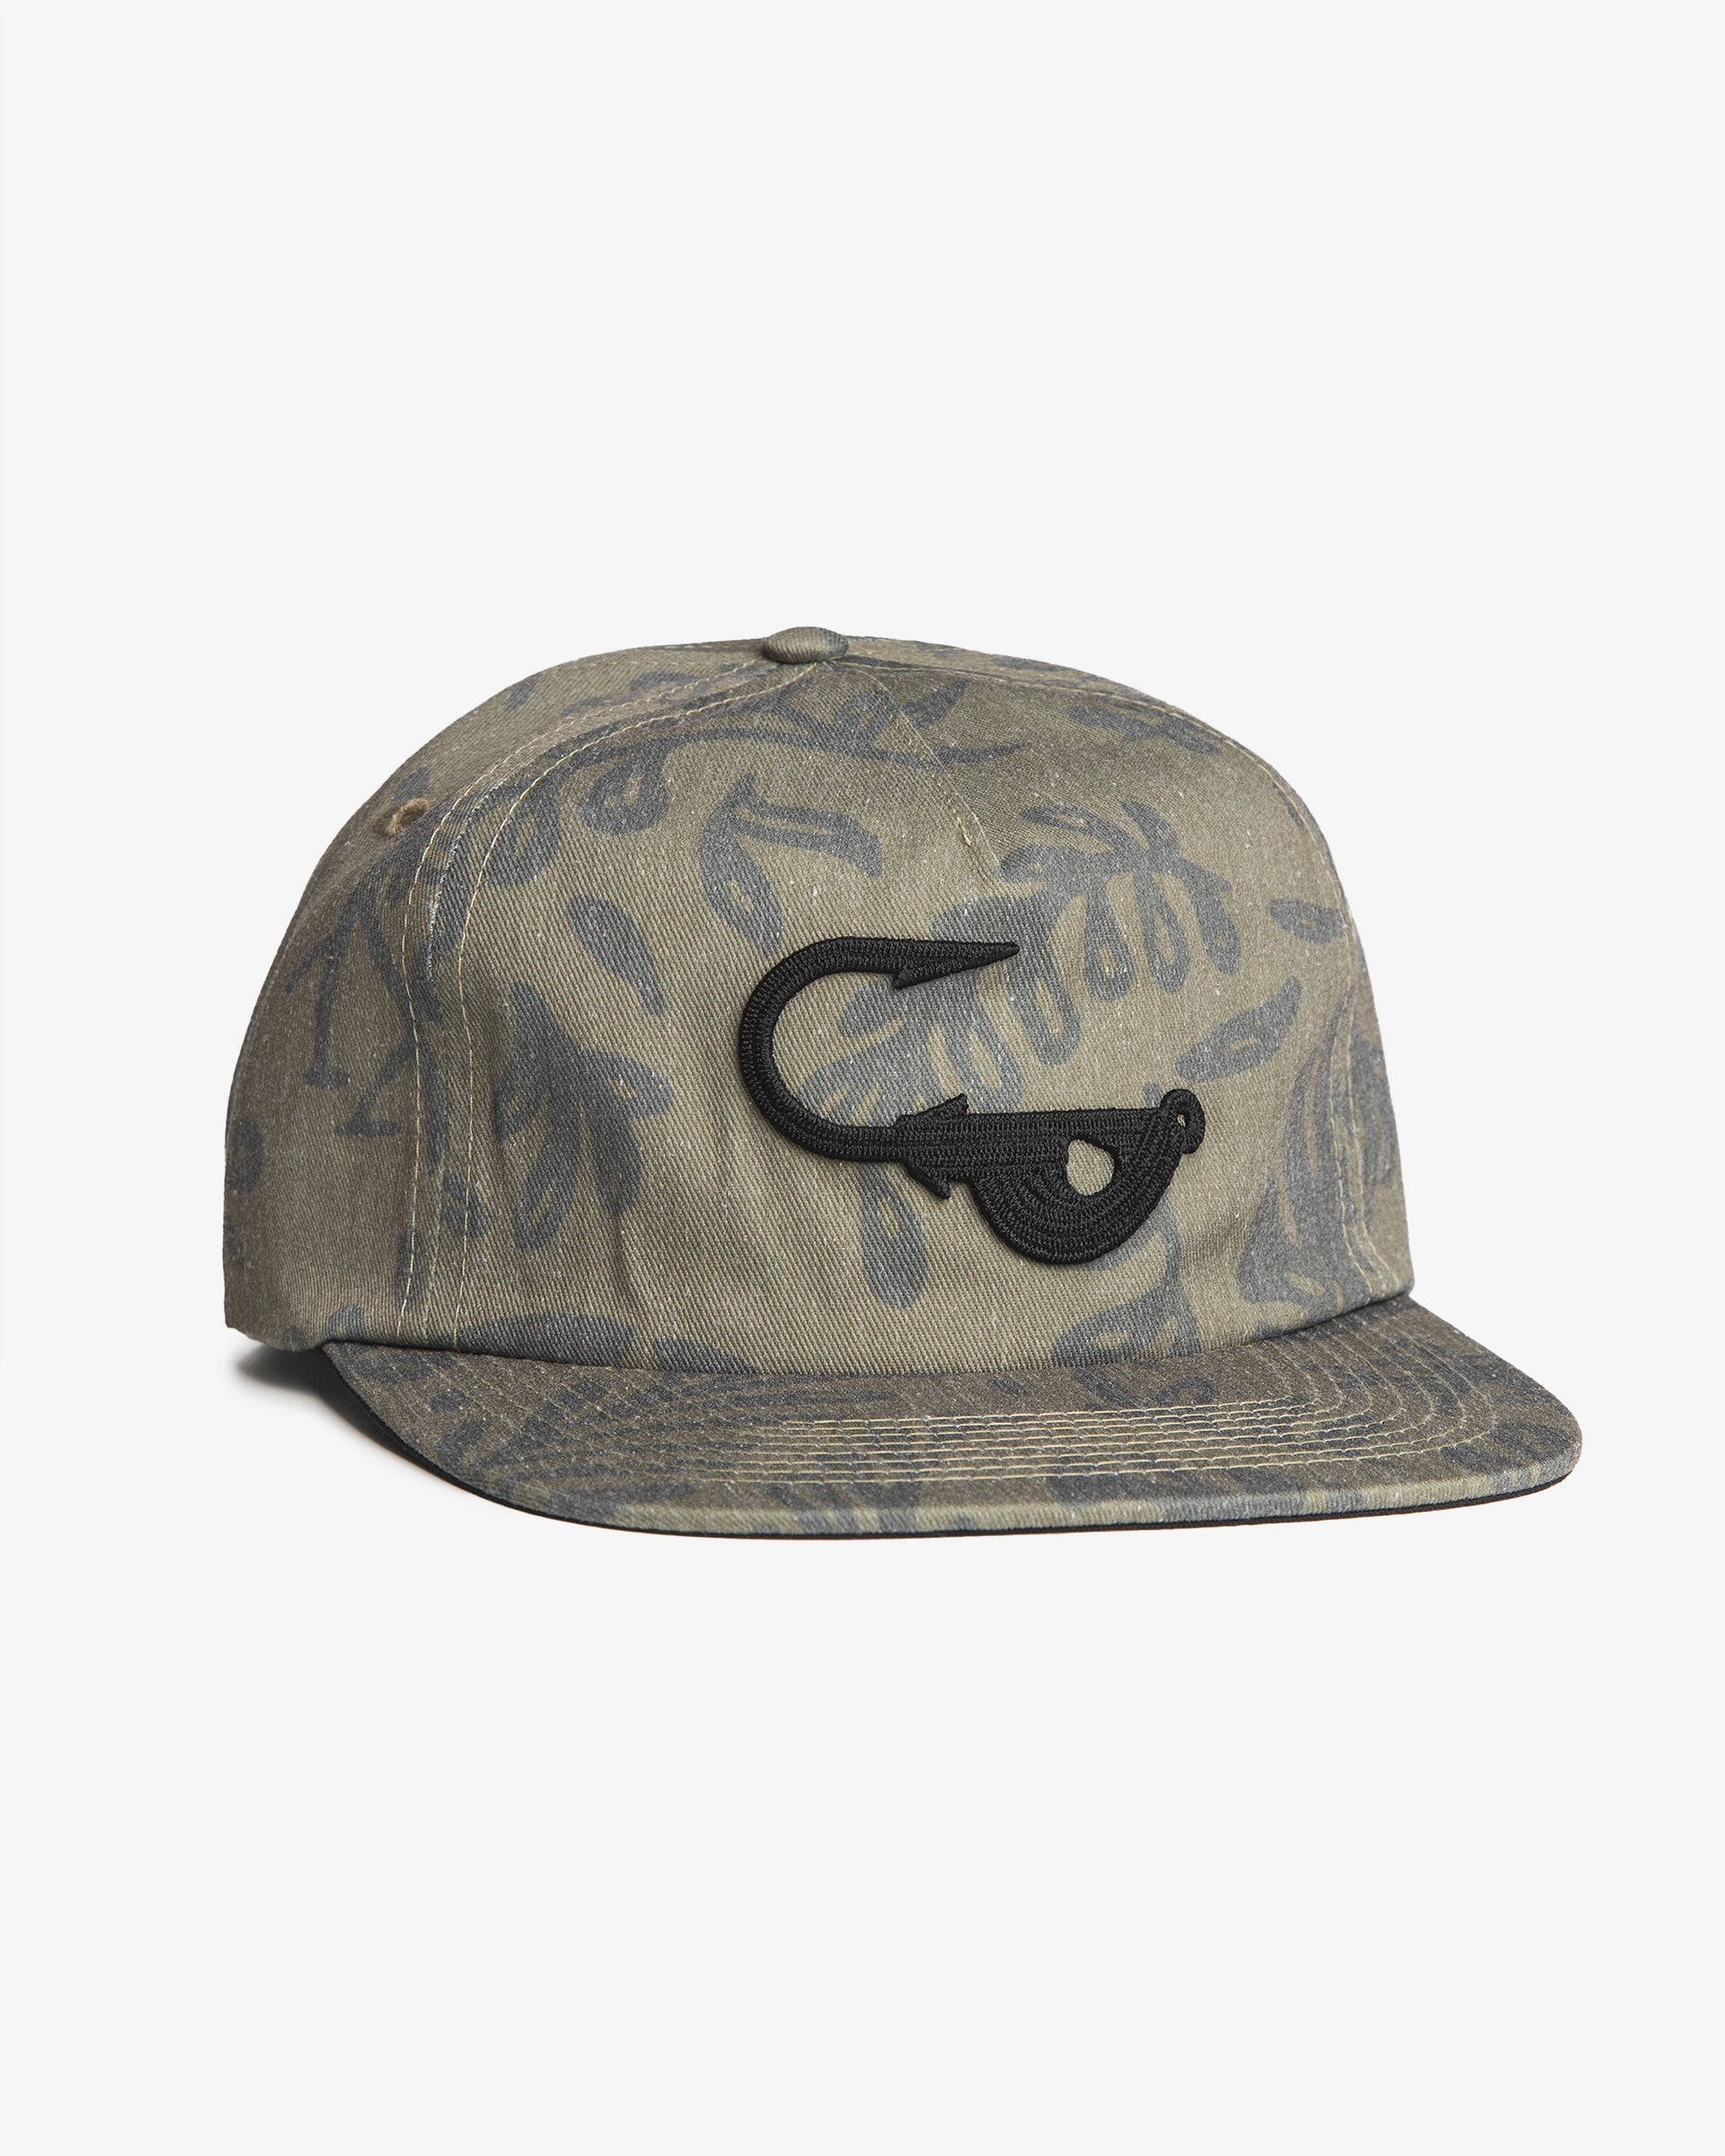 Angled front view of the Jigalode "Mighty Jig" 5-Panel hat. The hat is a moss green color with a tropical plant pattern printed all over. The front of the fishing hat features the Jigalode "Mighty Jig" logo.